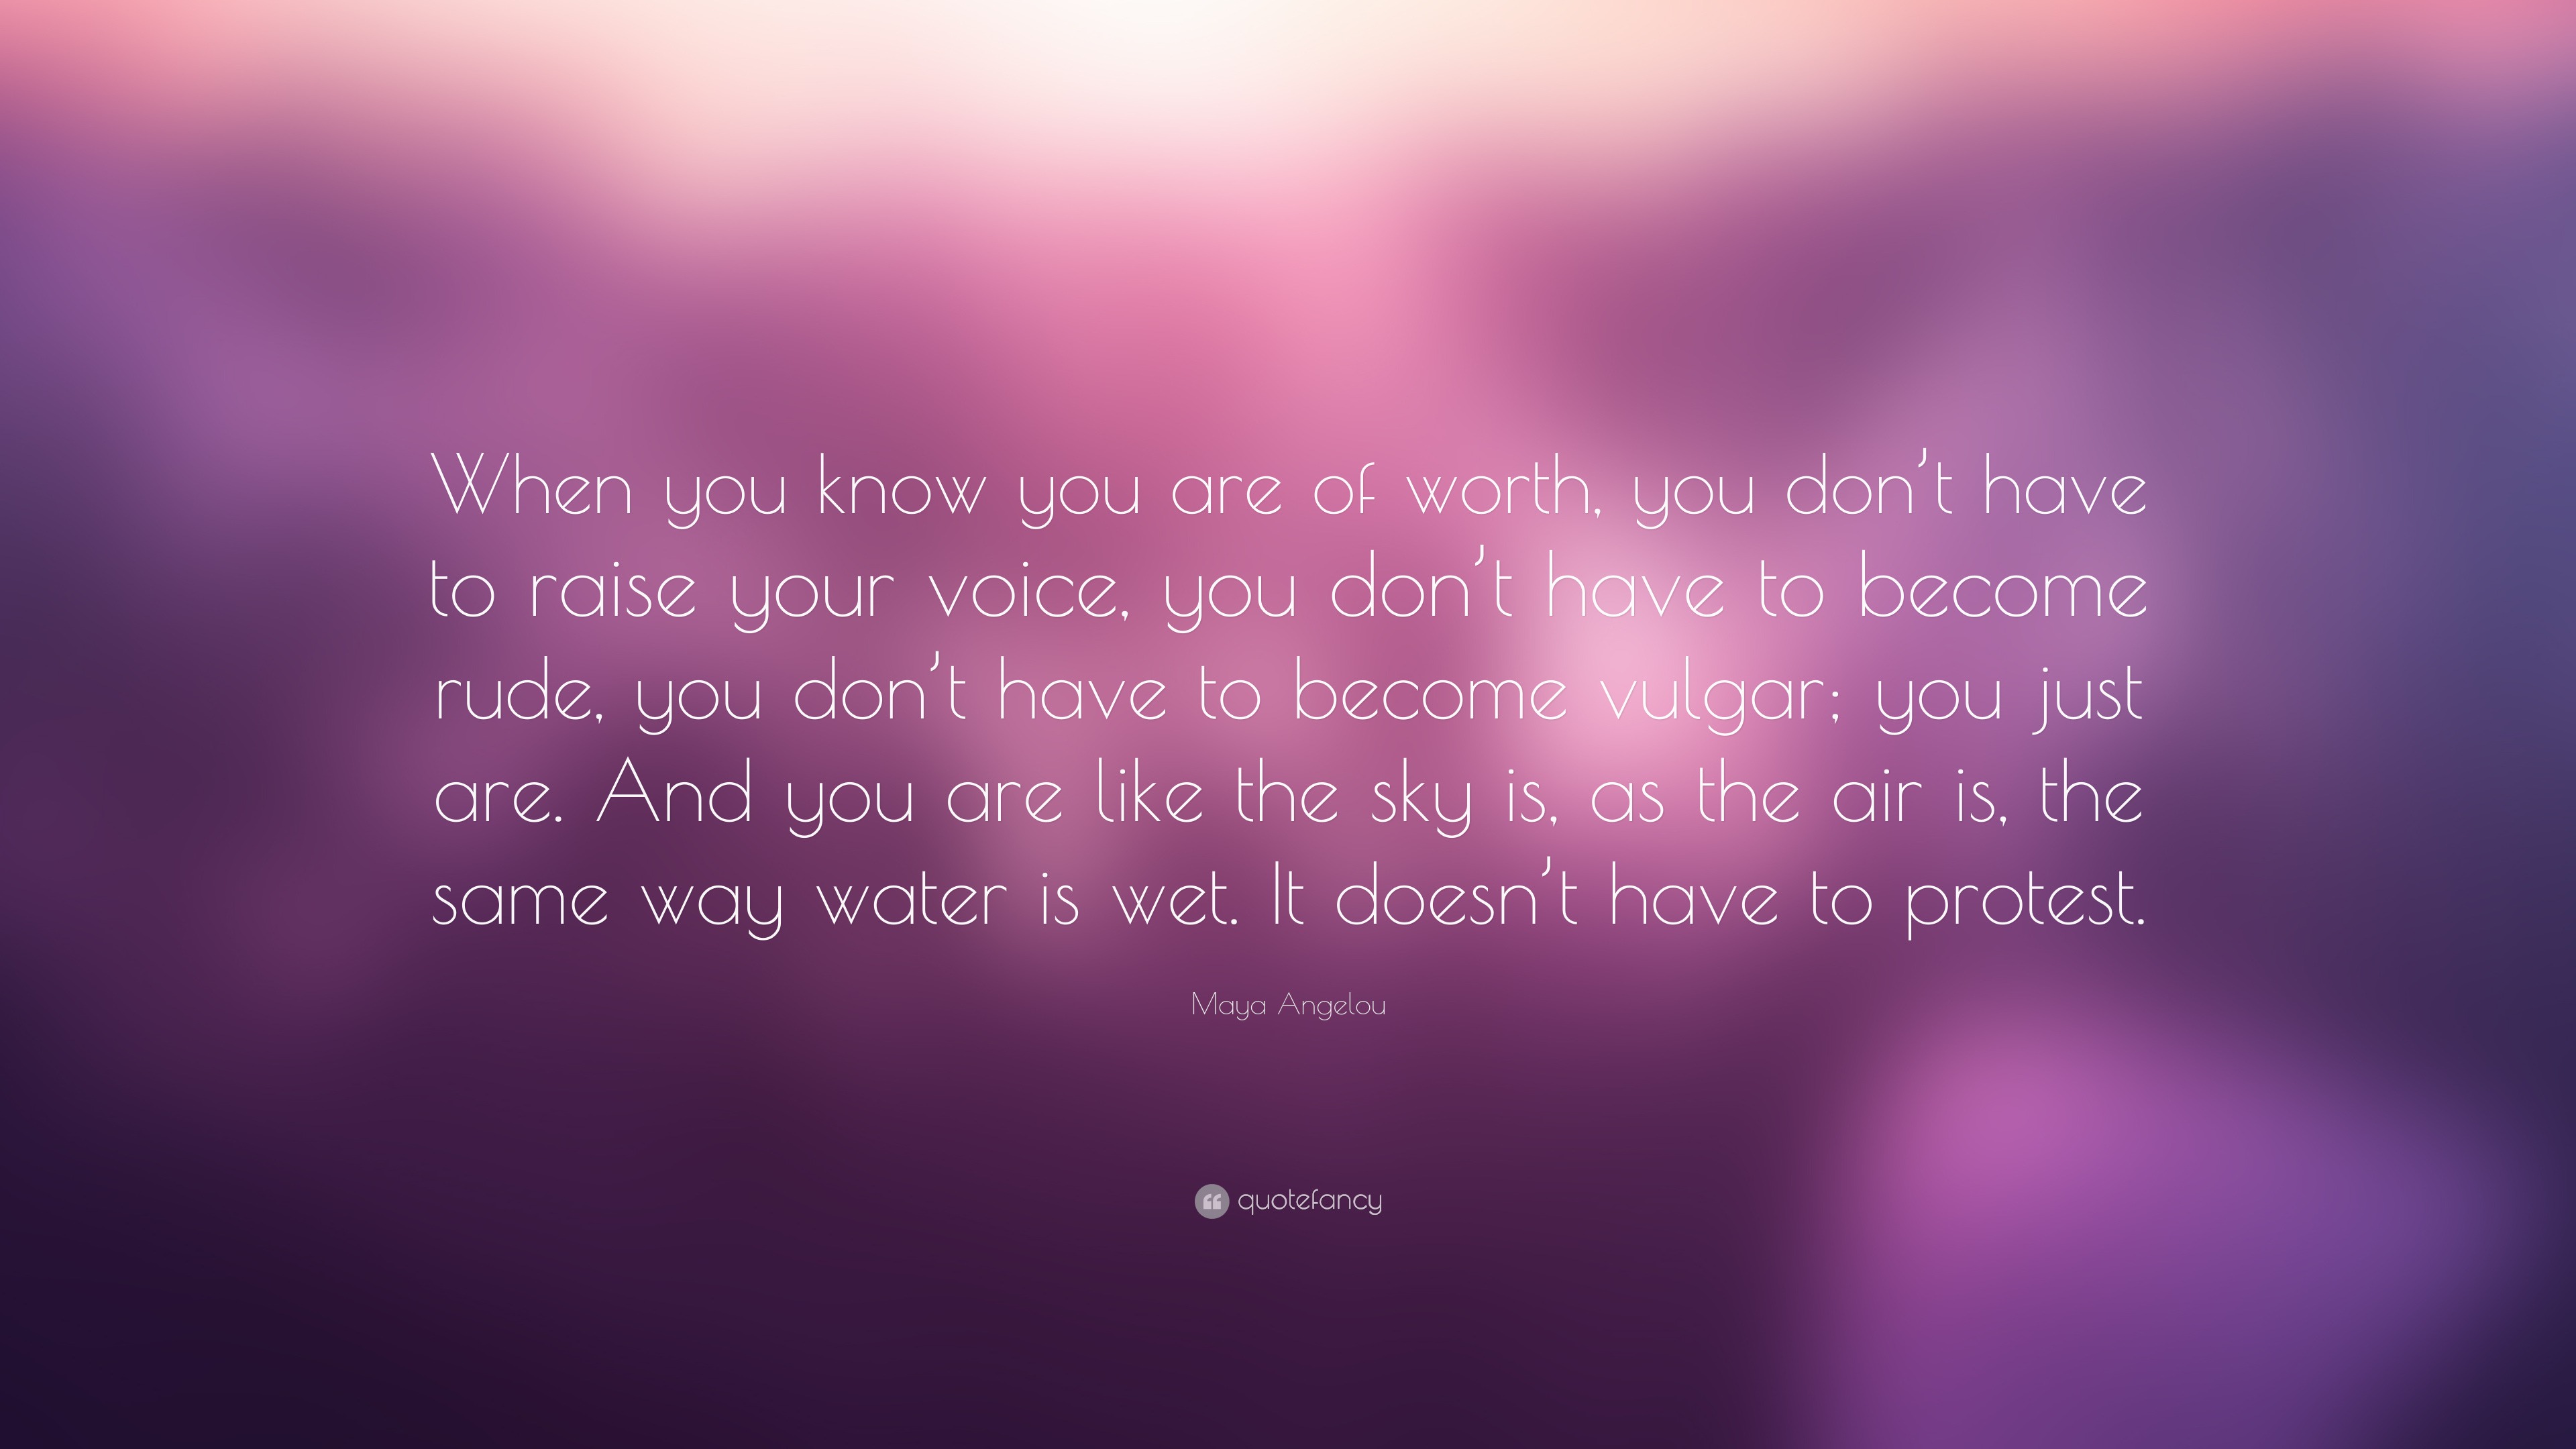 Maya Angelou Quote: “When you know you are of worth, you don’t have to ...